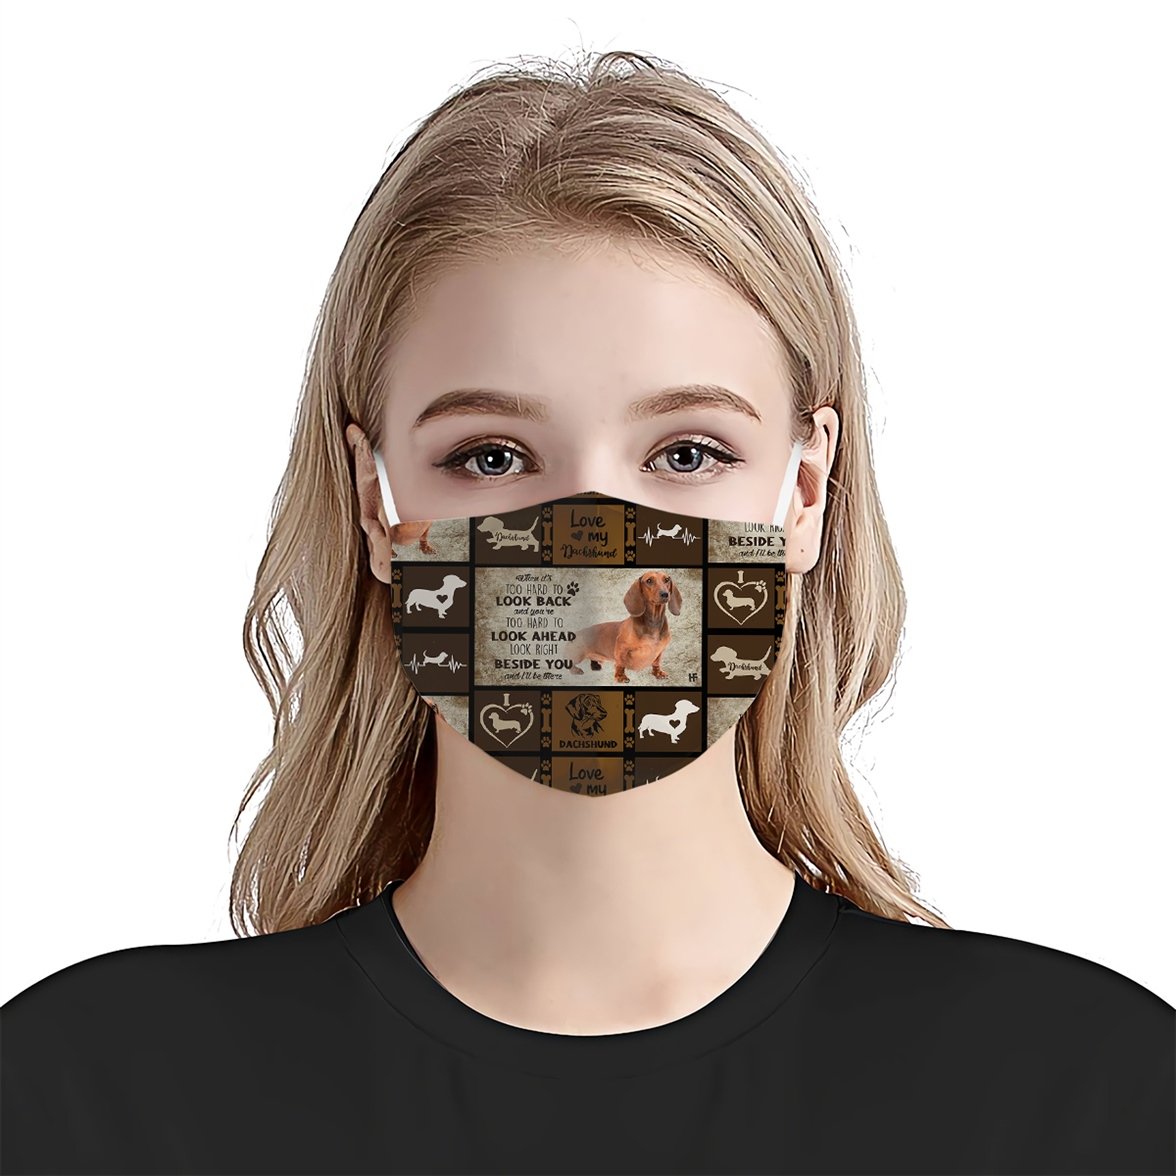 WHEN IT'S TOO HARD TO LOOK BACK DACHSHUND EZ15 3007 Face Mask